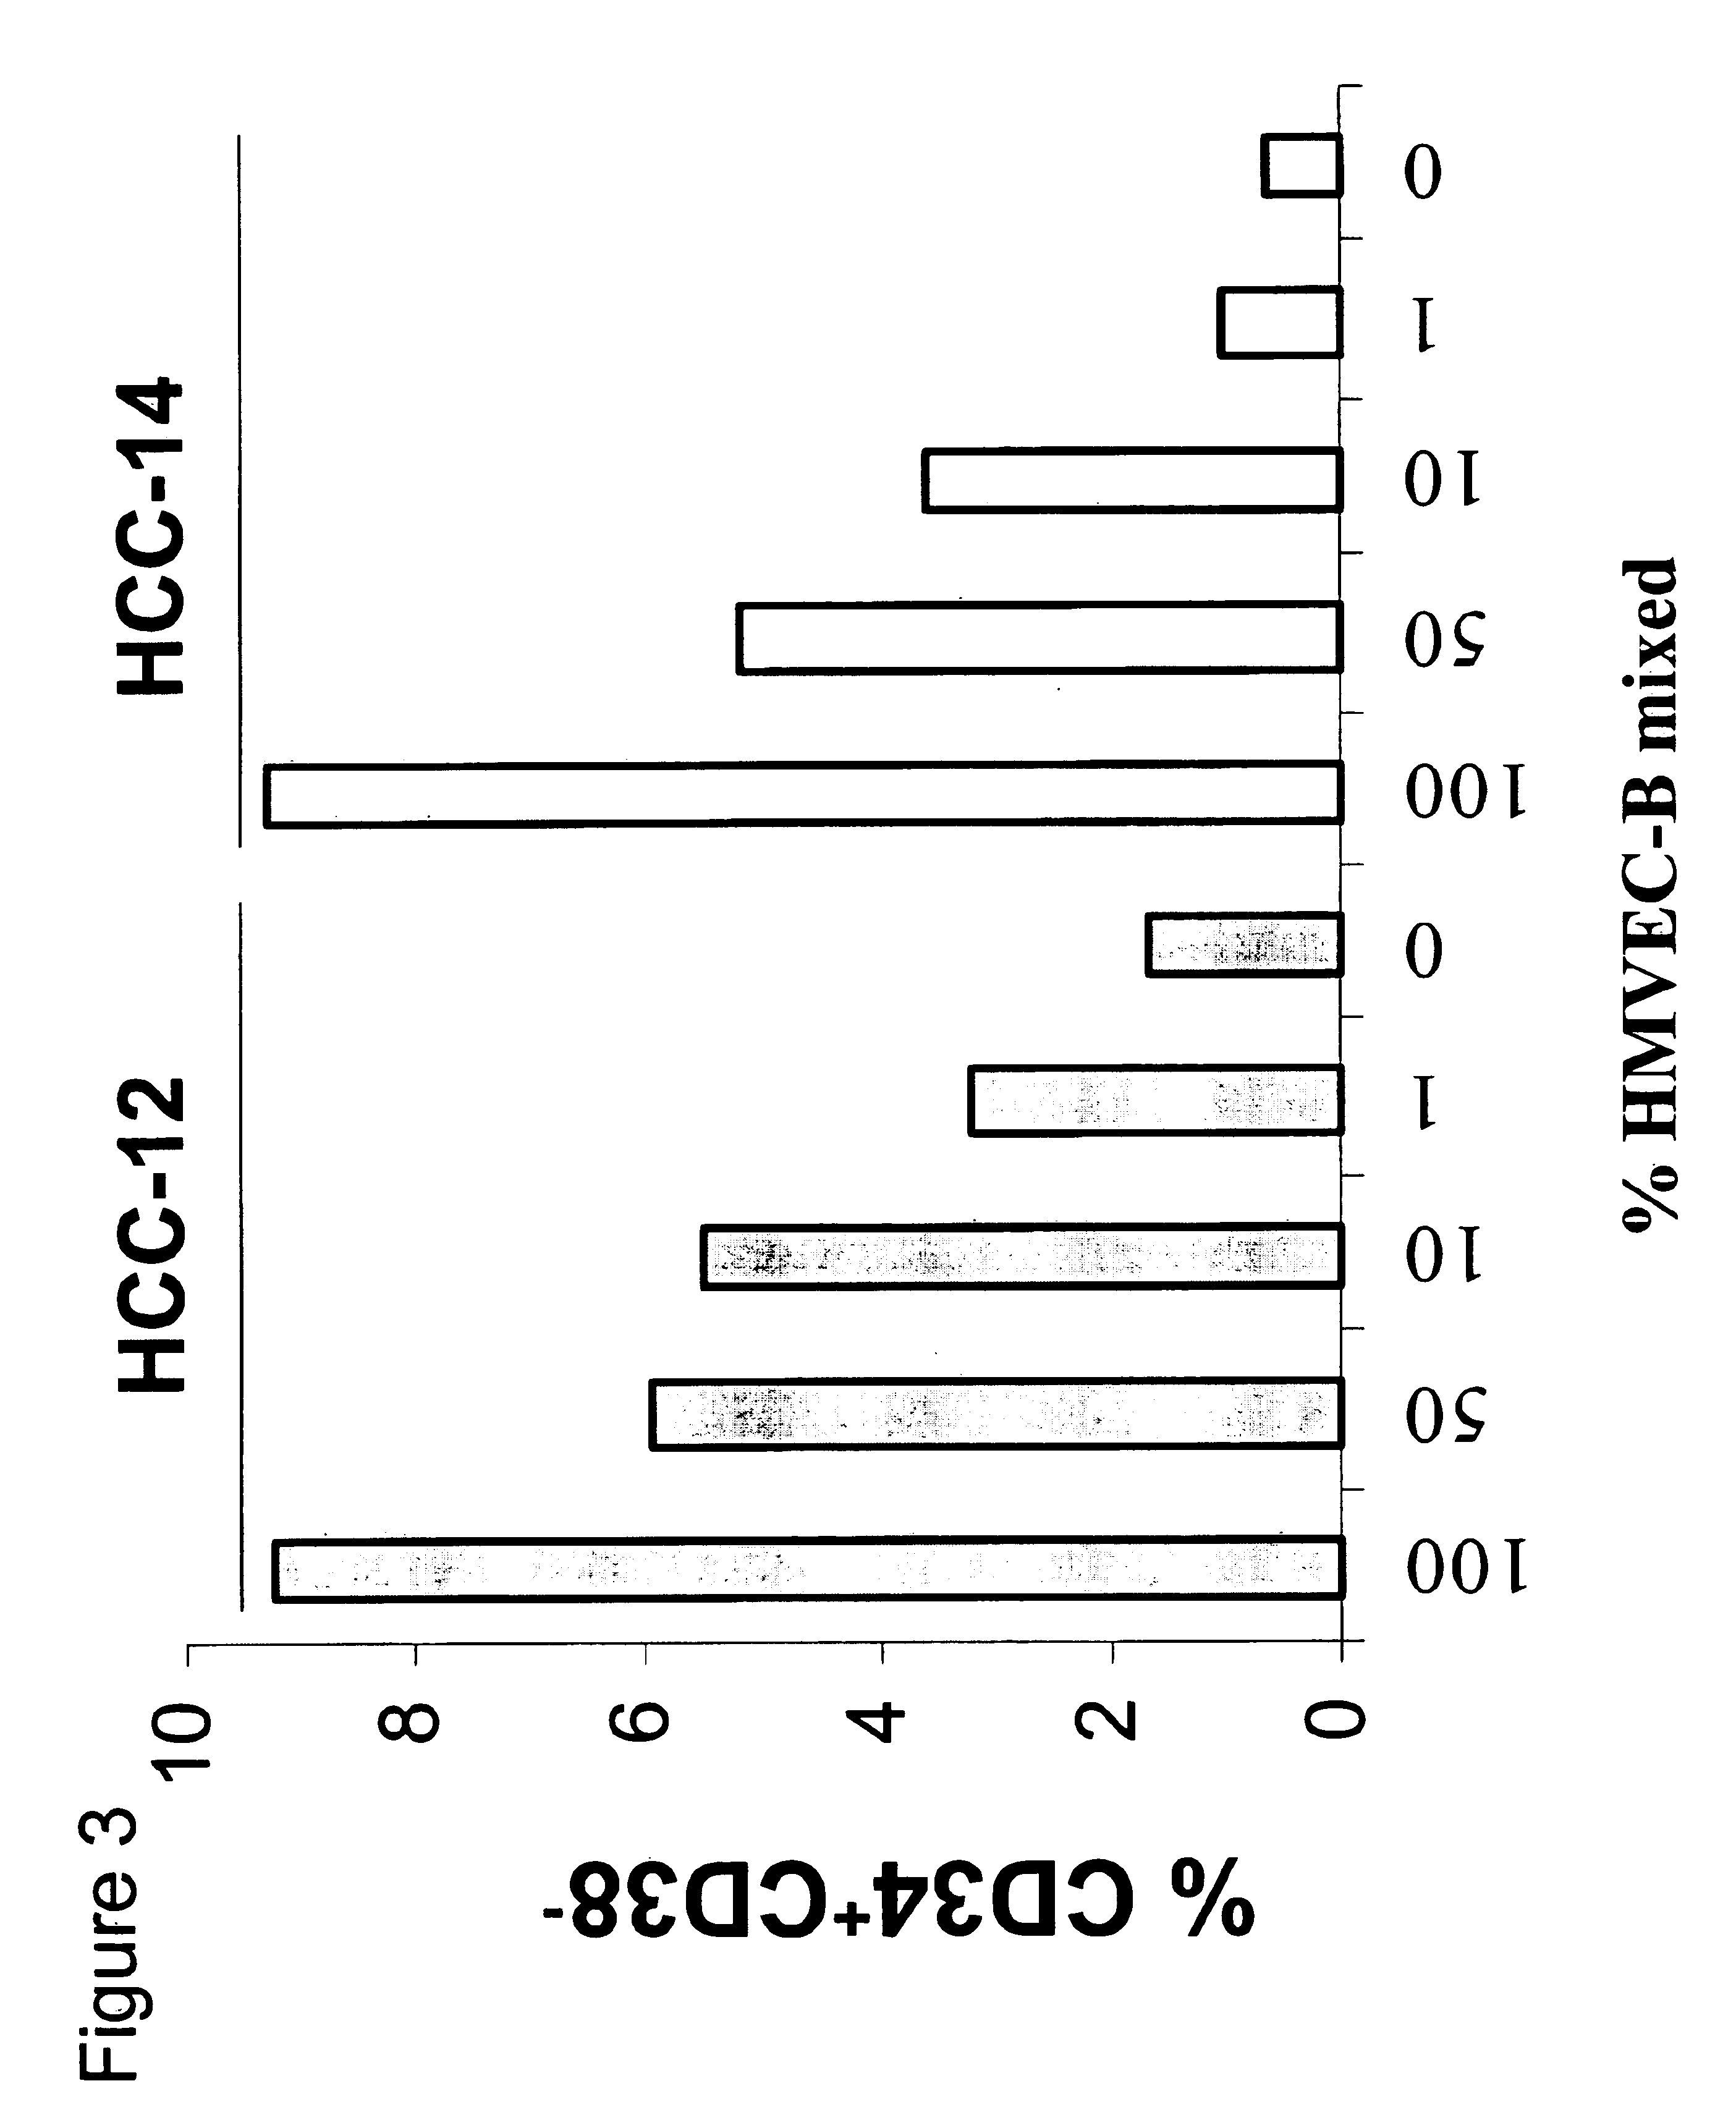 Modulation of primary stem cell differentiation using an insulin-like growth factor binding protein